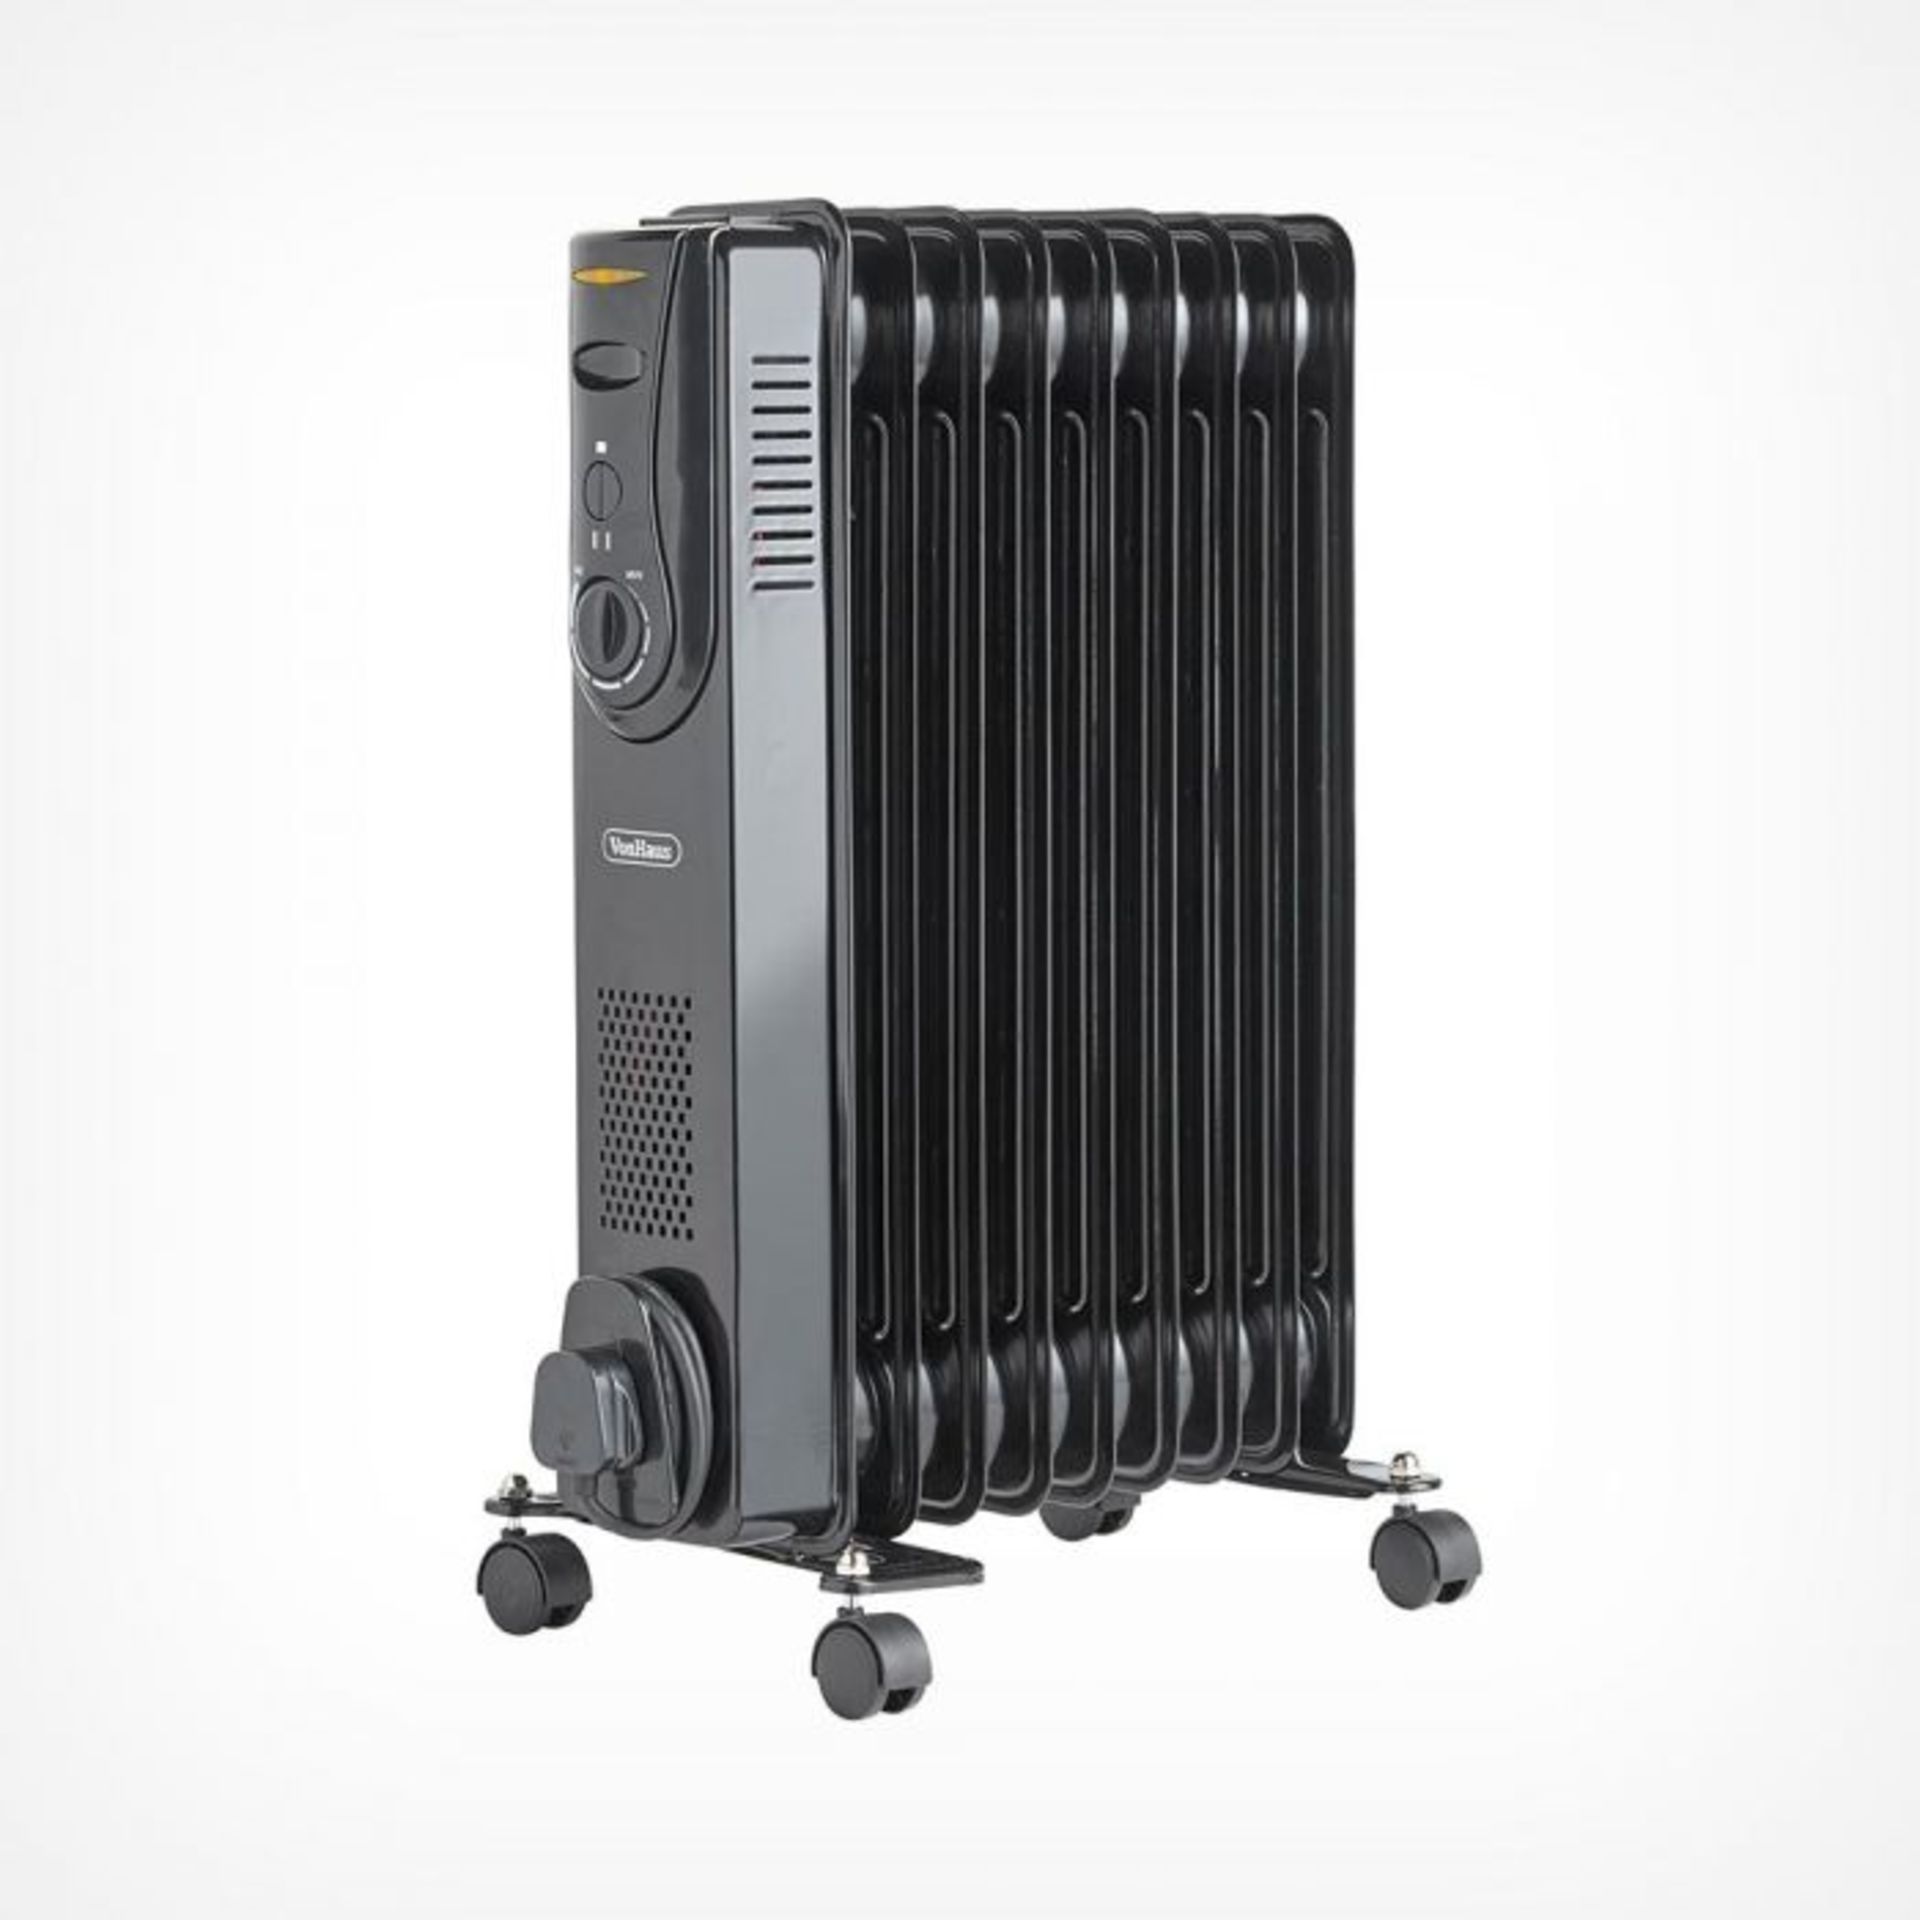 (V51) 9 Fin 2000W Oil Filled Radiator - Black Powerful 2000W radiator with 9 oil-filled fins ?... - Image 2 of 4